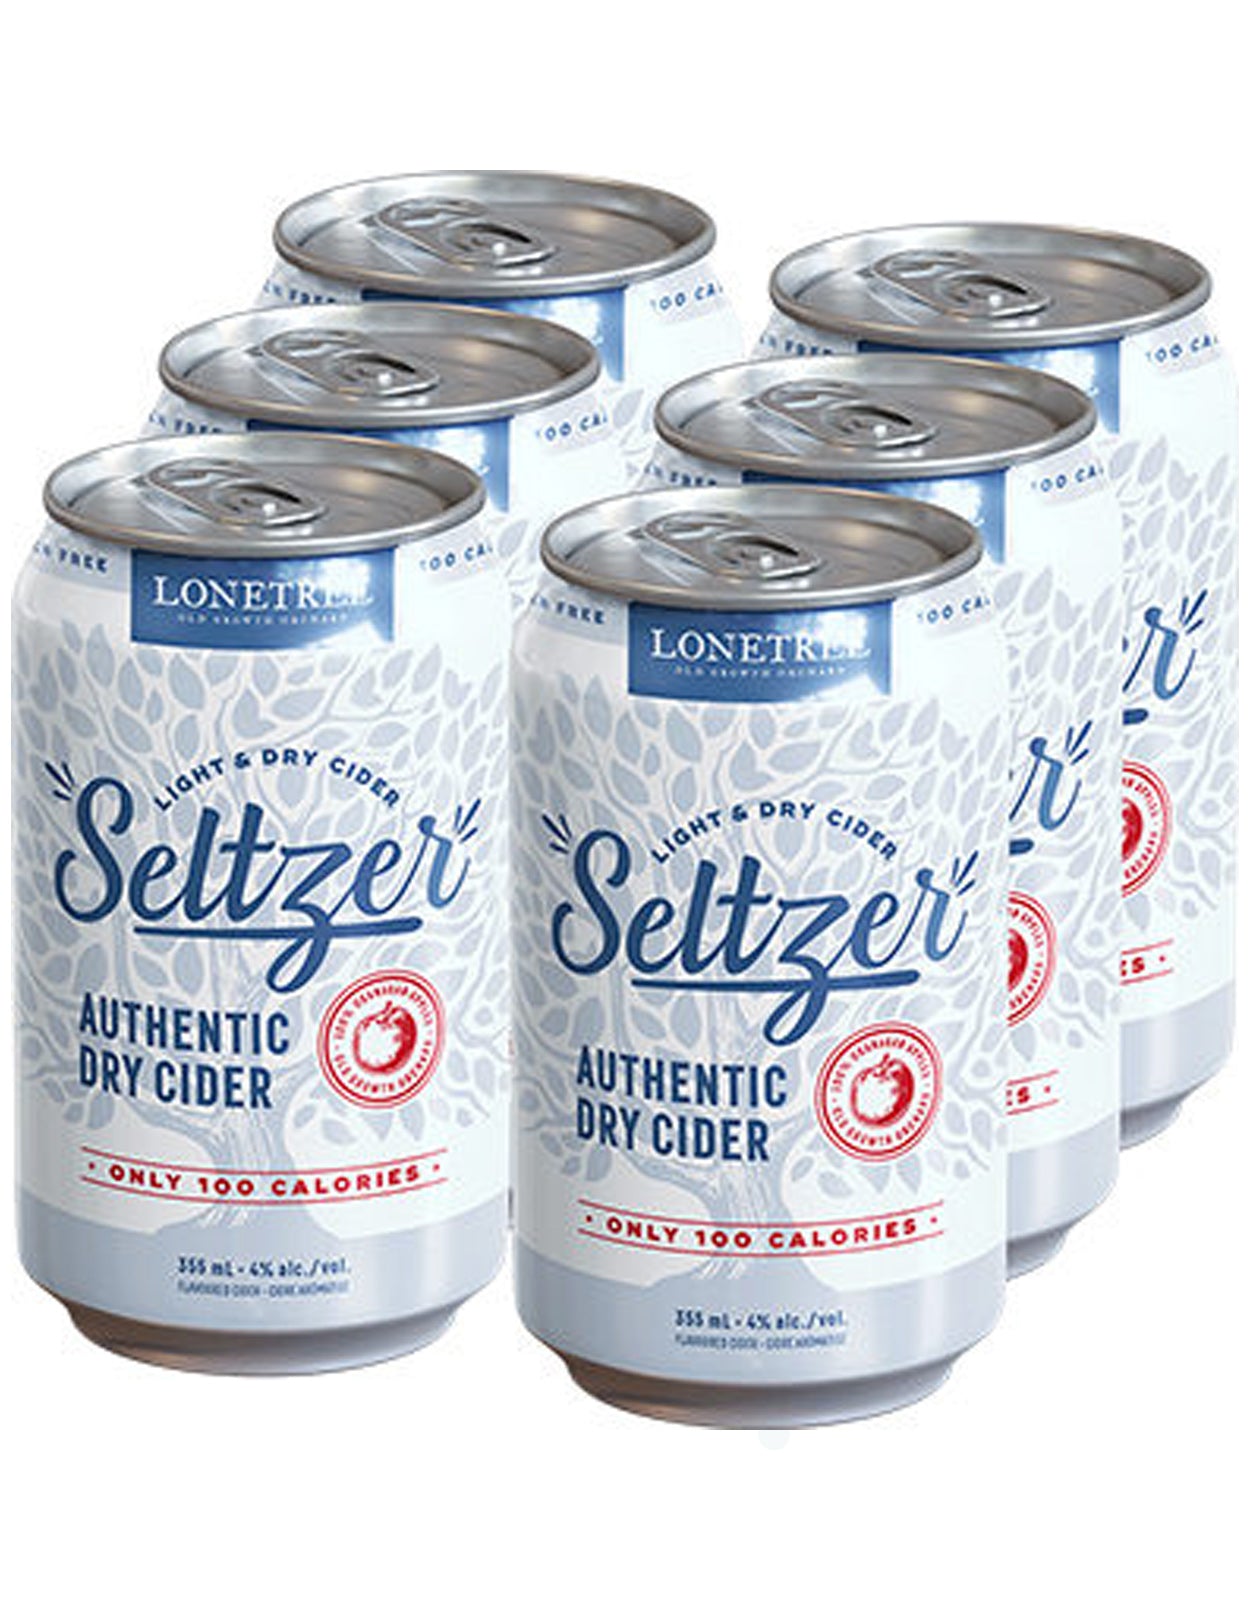 Lonetree Light And Dry Cider Seltzer 355 ml - 6 Cans